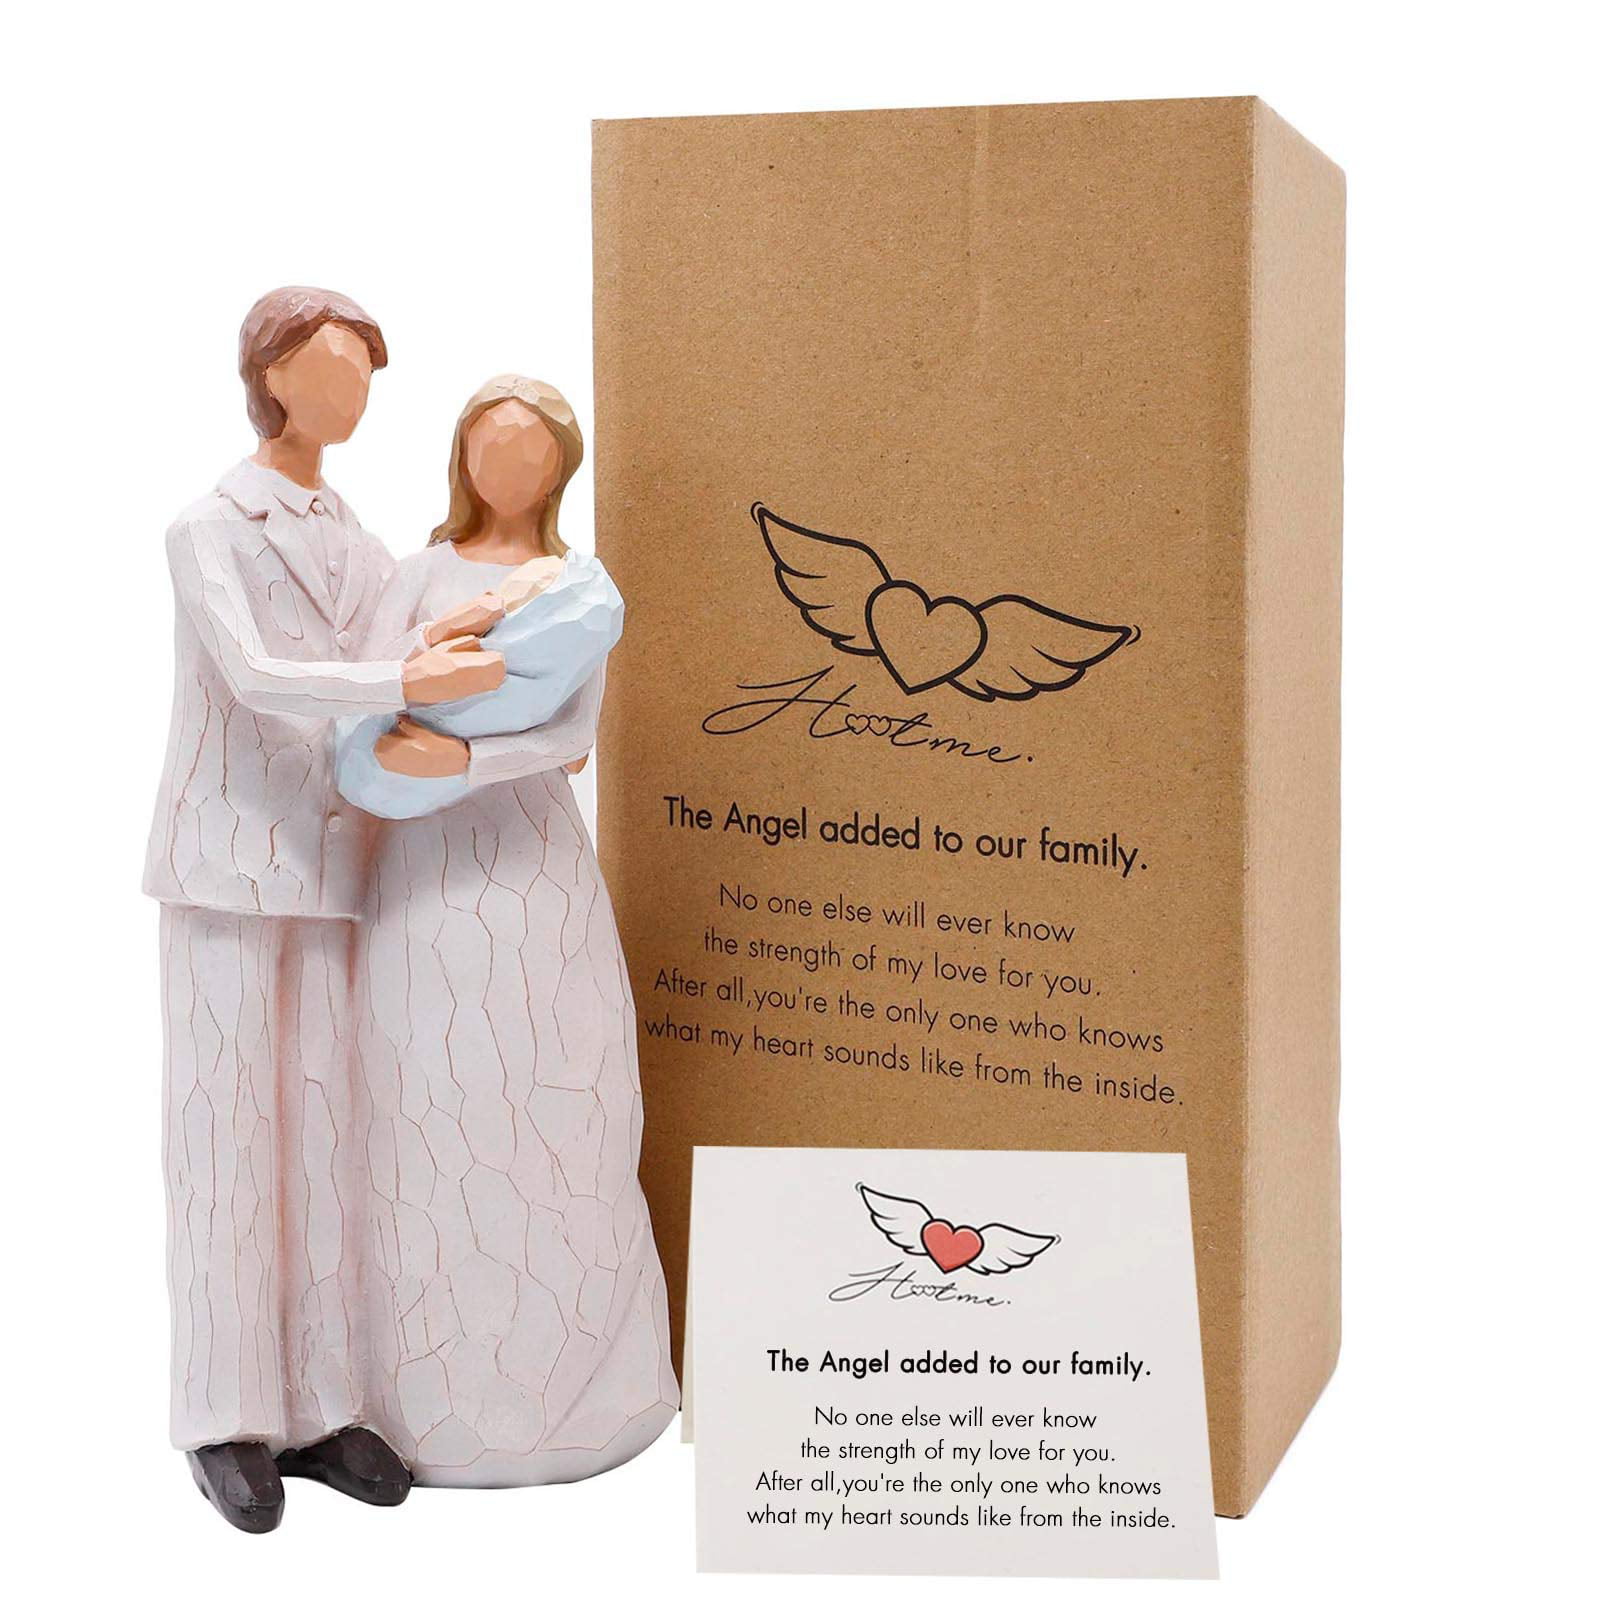 The Greatest Bond Mon and Child Sculptures Multicolor Sculpted Hand-Painted Figures with Gift Card for Anniversary Birthday Mother and Son Figurines Statues